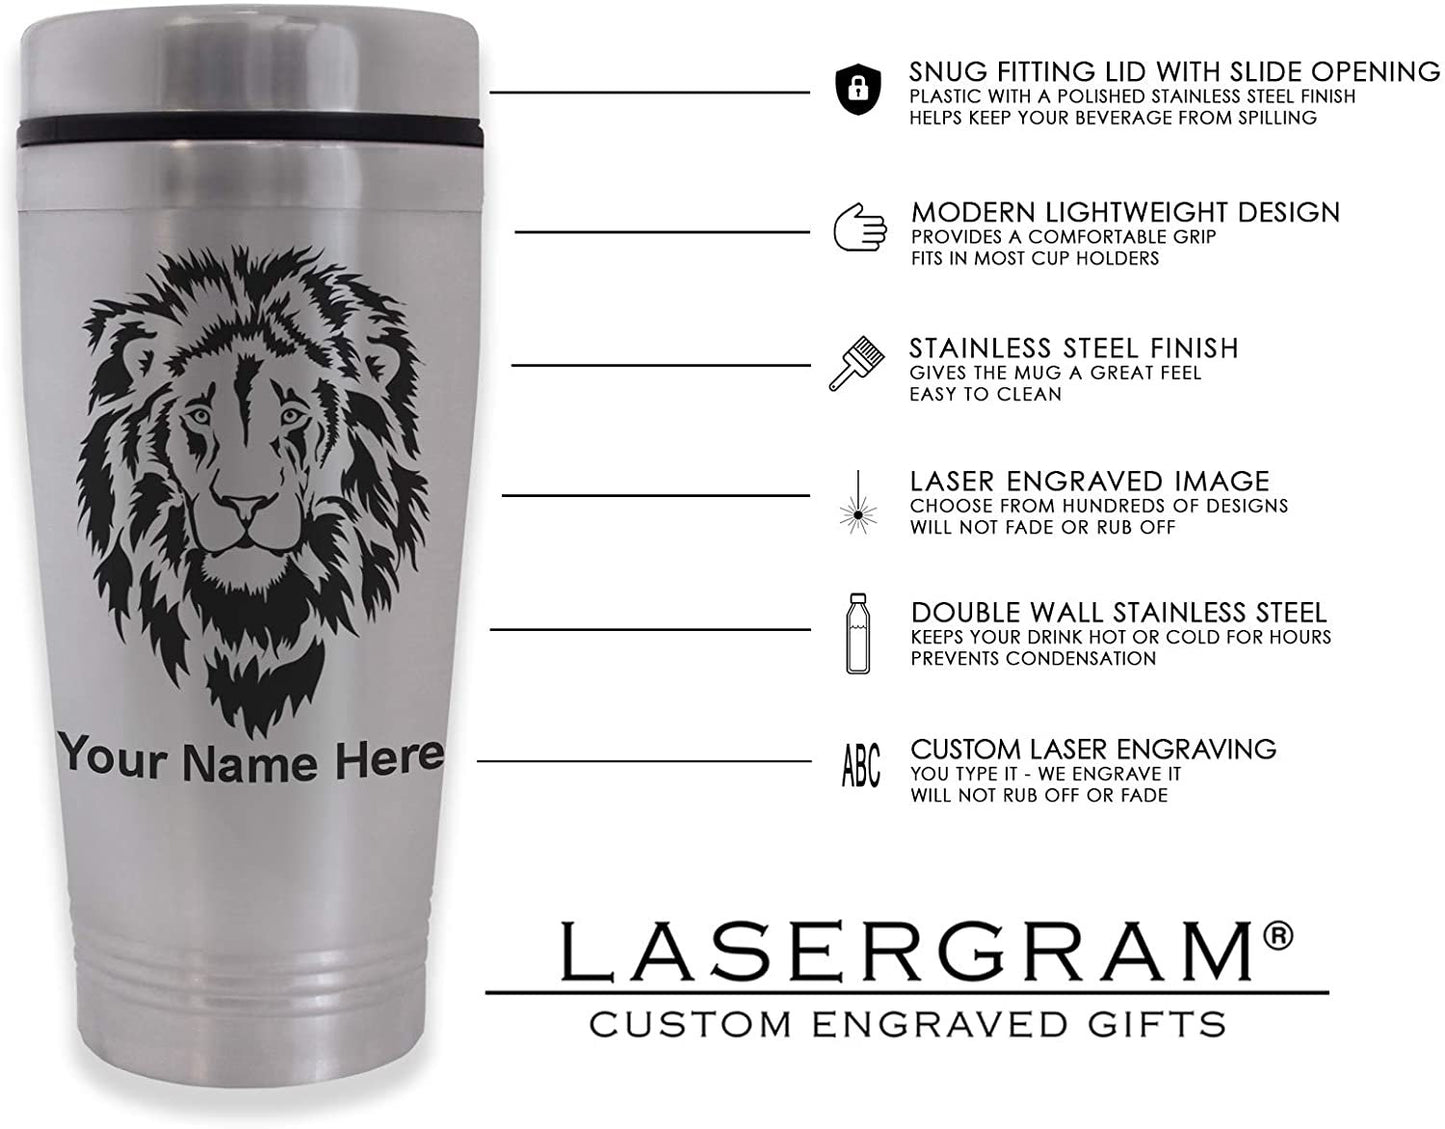 Personalized Travel Thermos or Ceramic Mug for Doctor Hot or Cold